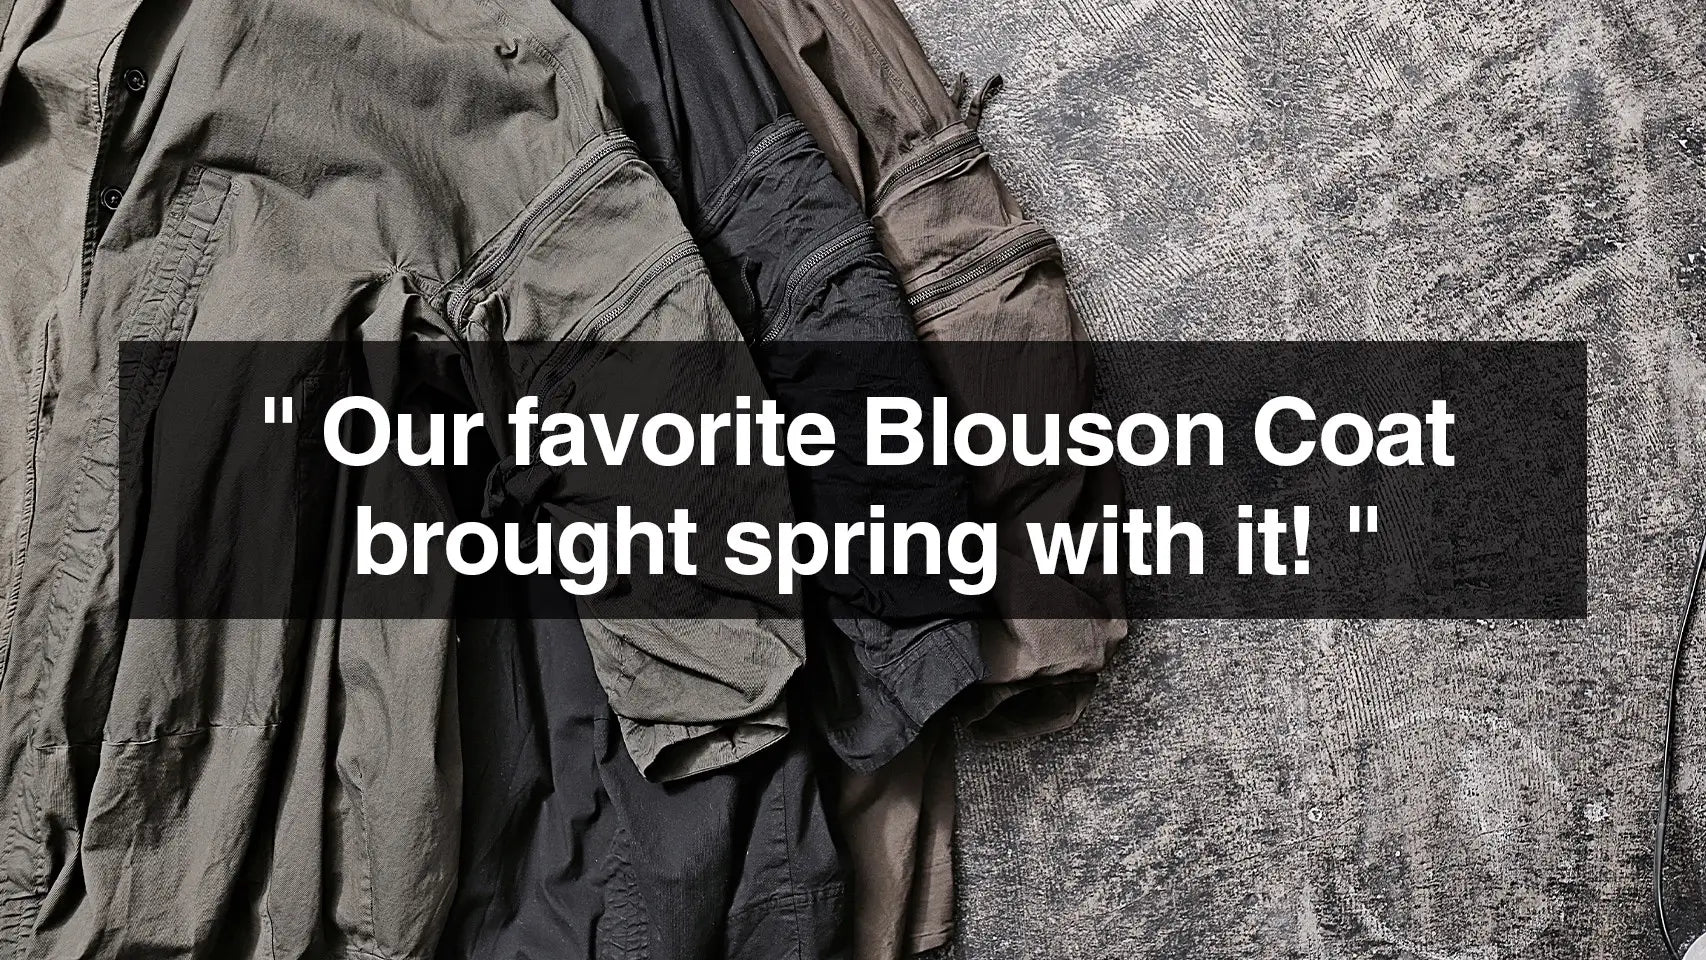 Our favorite Blouson Coat brought spring with it!